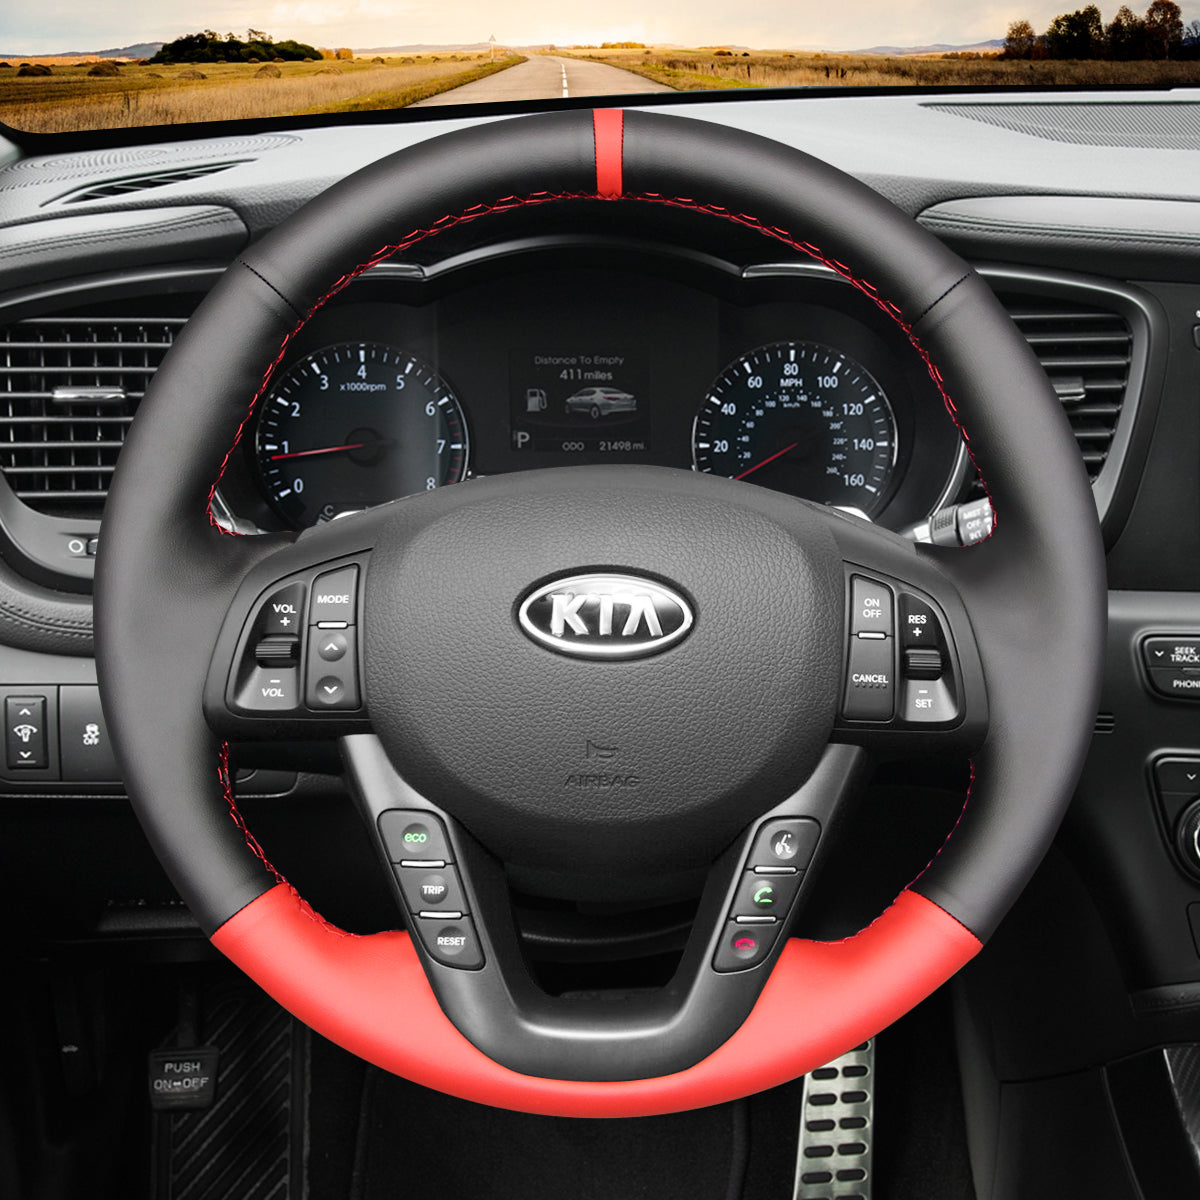 MEWANT Hand Stitch Black Red PU Leather Car Steering Wheel Cover for Kia K5 Optima 2011-2013